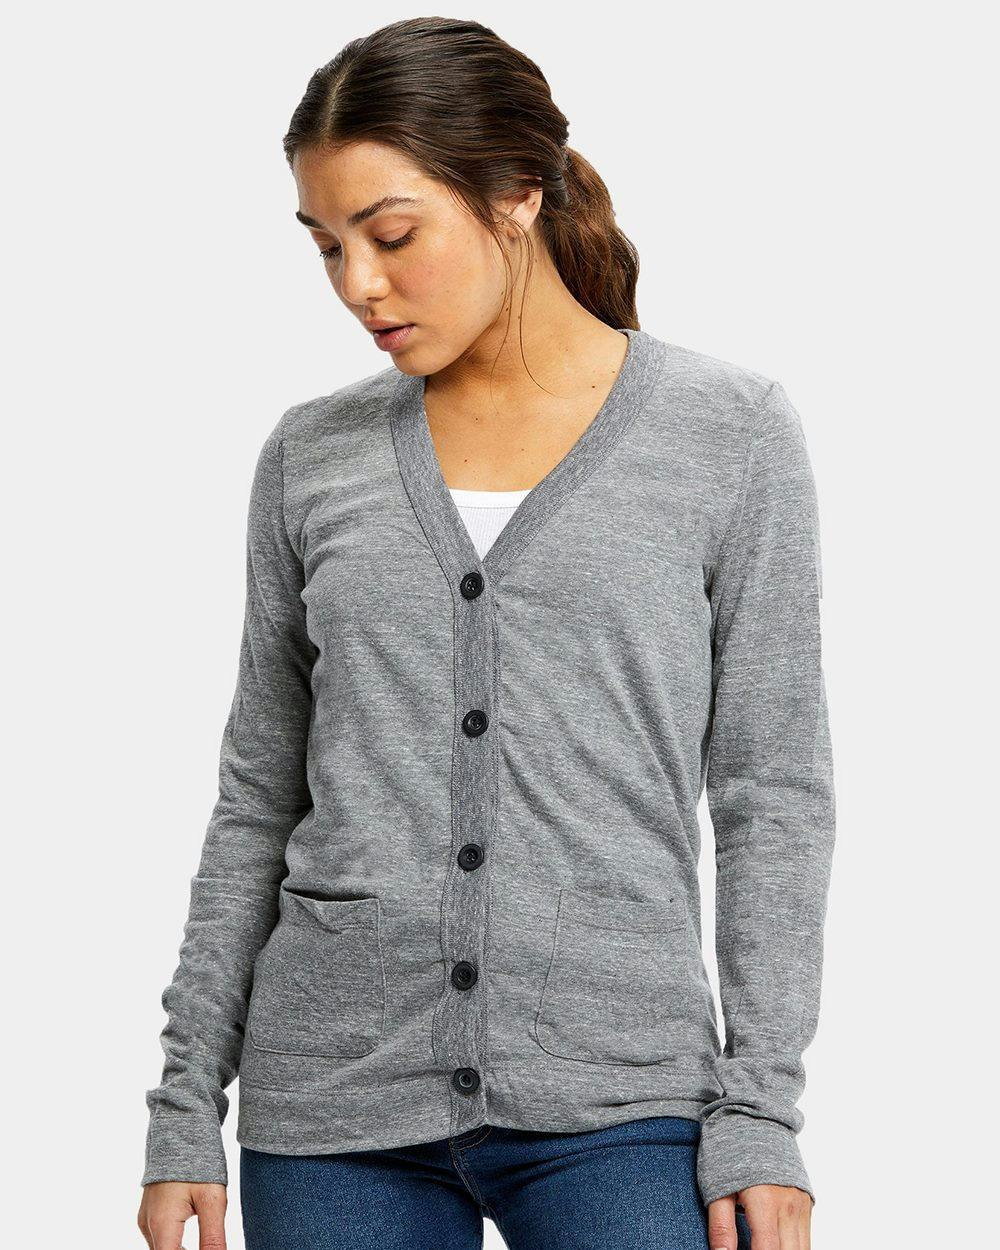 Image for Women's Long Sleeve Cardigan - US950